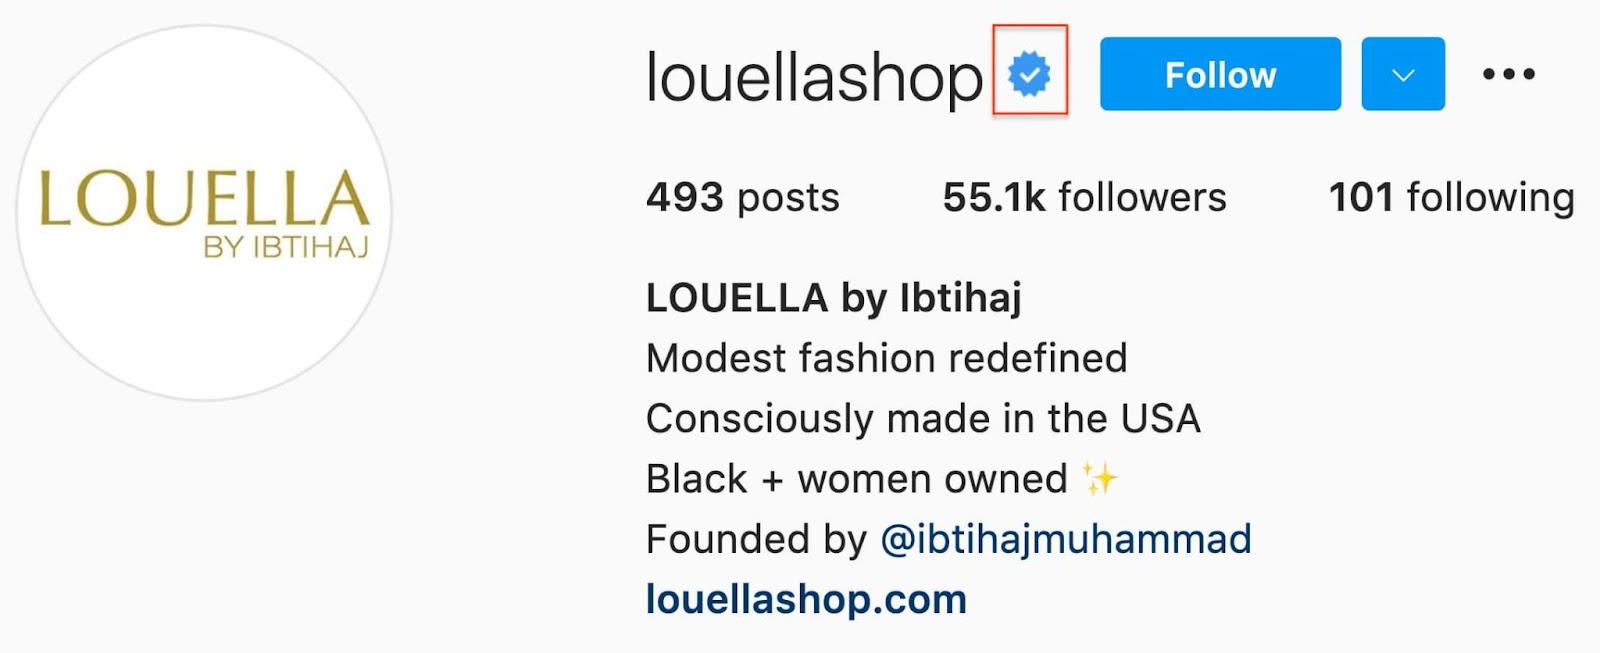 Example of Instagram verification page on @LouellaShop account